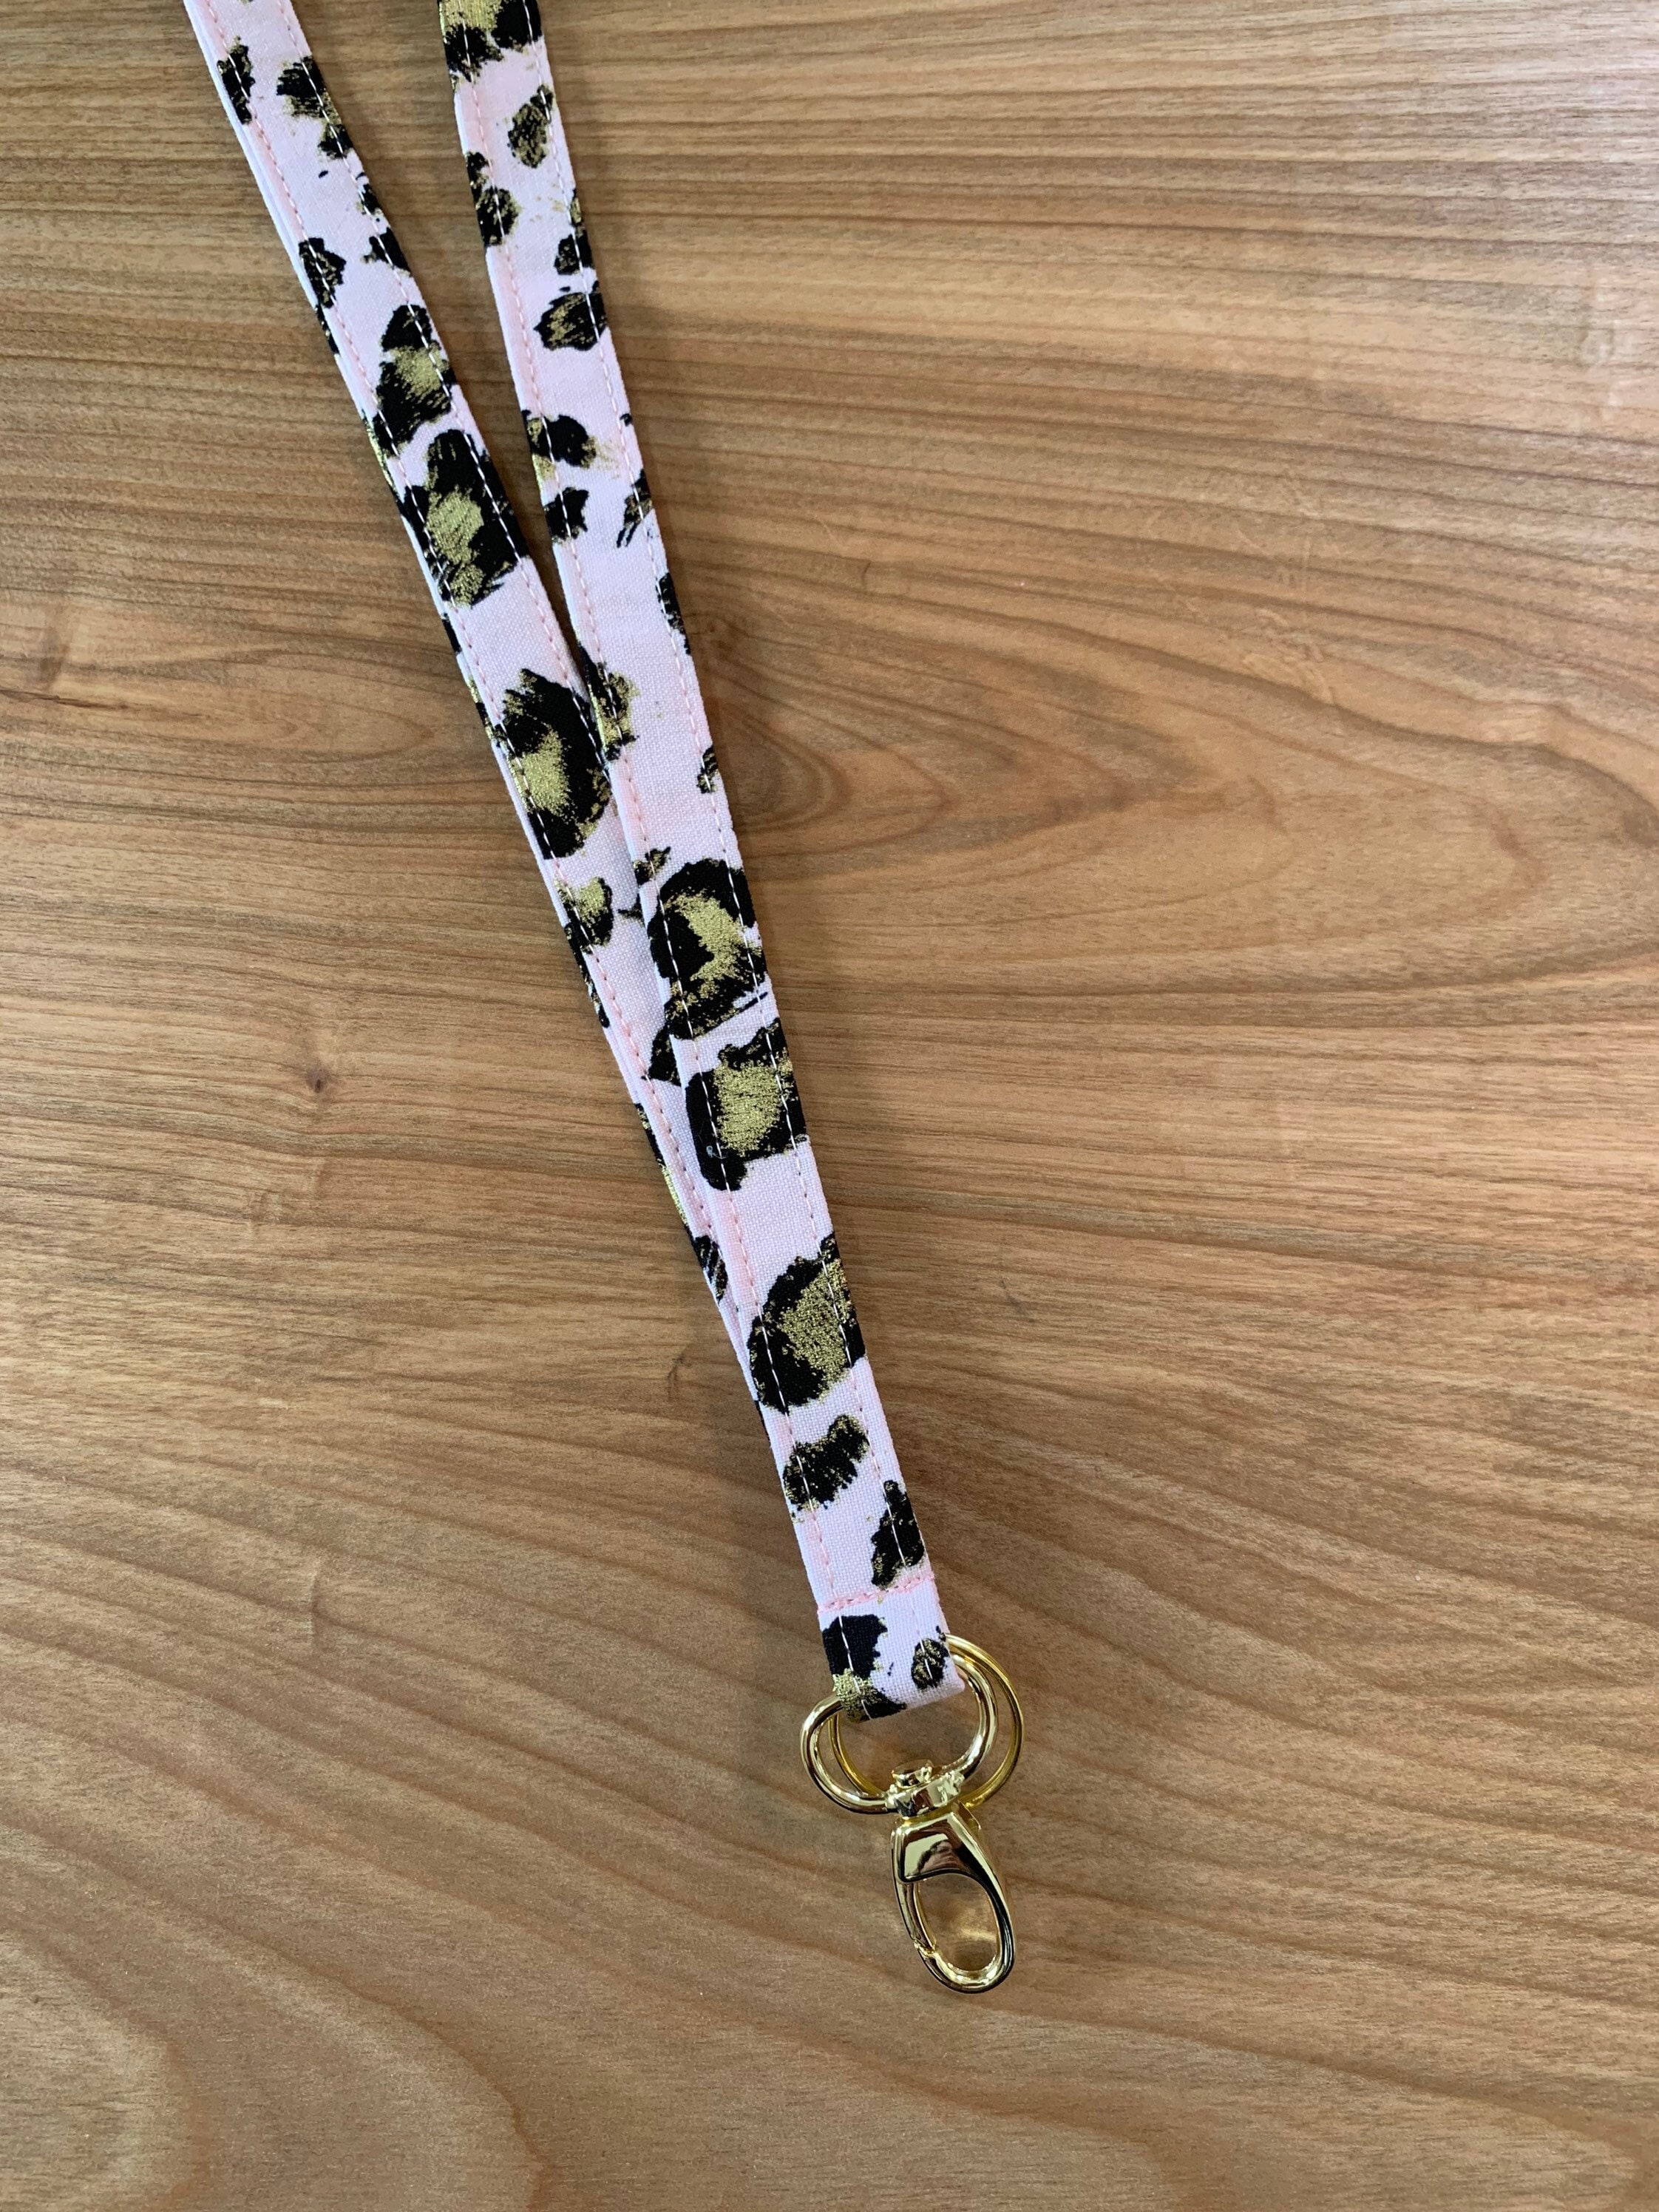 Flamingo,pcs Leopard Print Lanyard Set,Consist of 1pc Neck Lanyards for ID Badges for Women Cute & ID Badges Holder-1pc Badge Reels Retractable